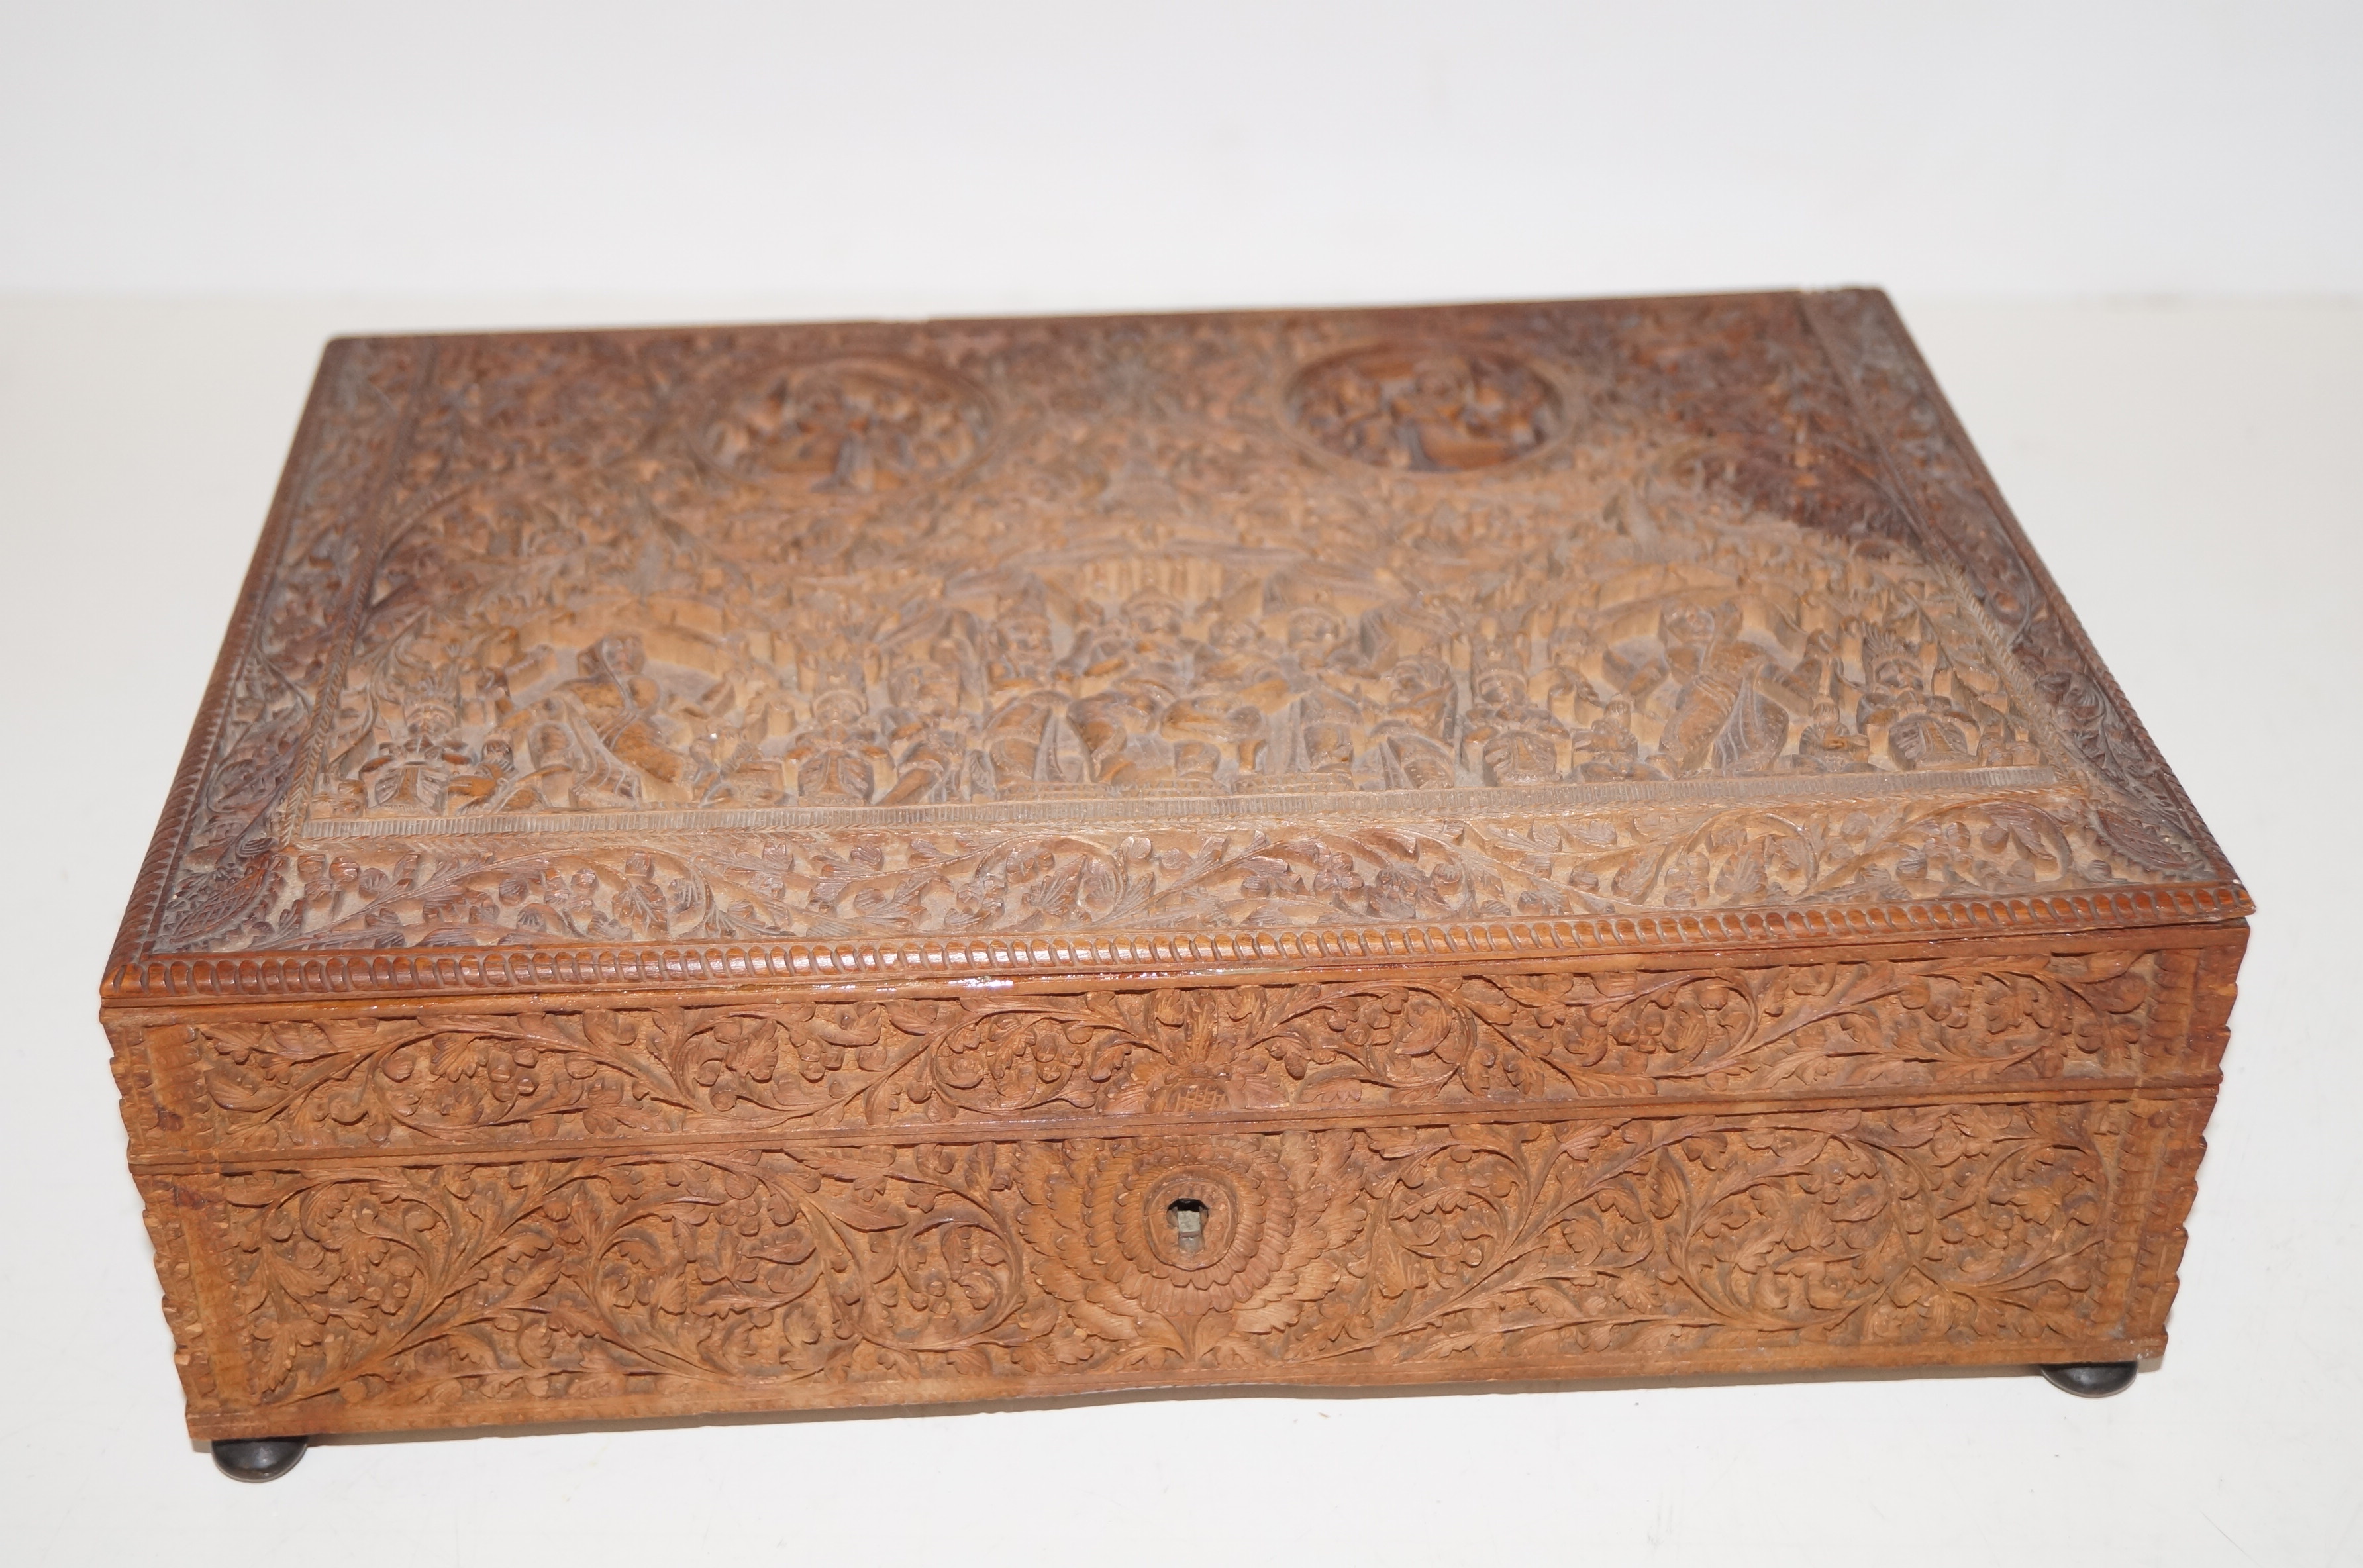 Indian carved wood box with key